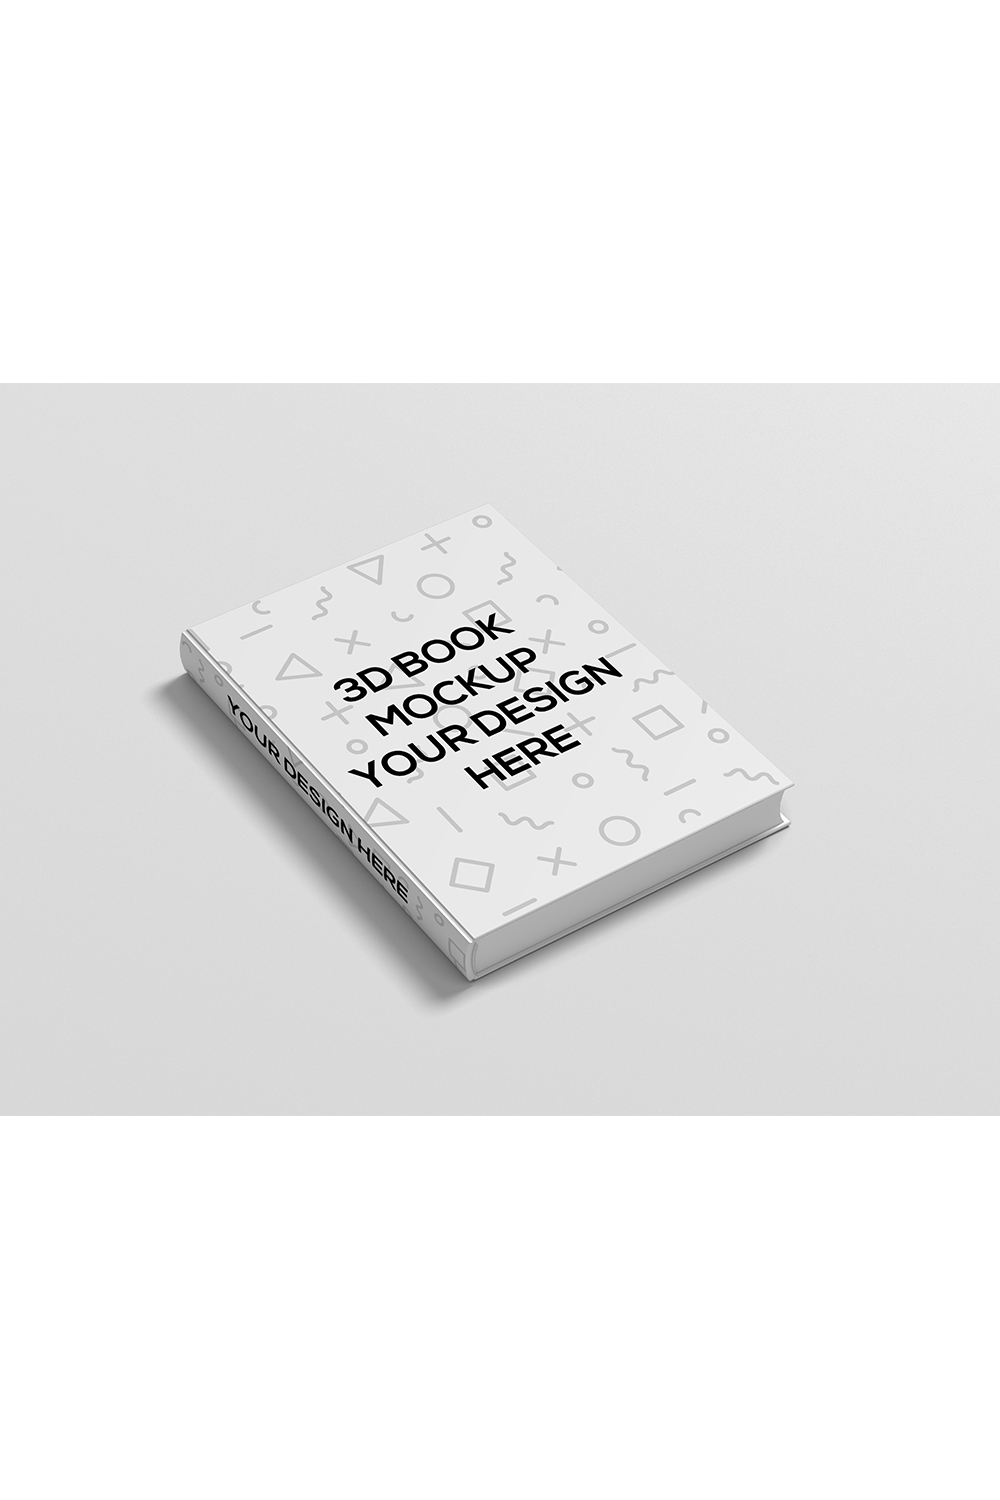 Realistic Hard Cover Book Mockup pinterest preview image.